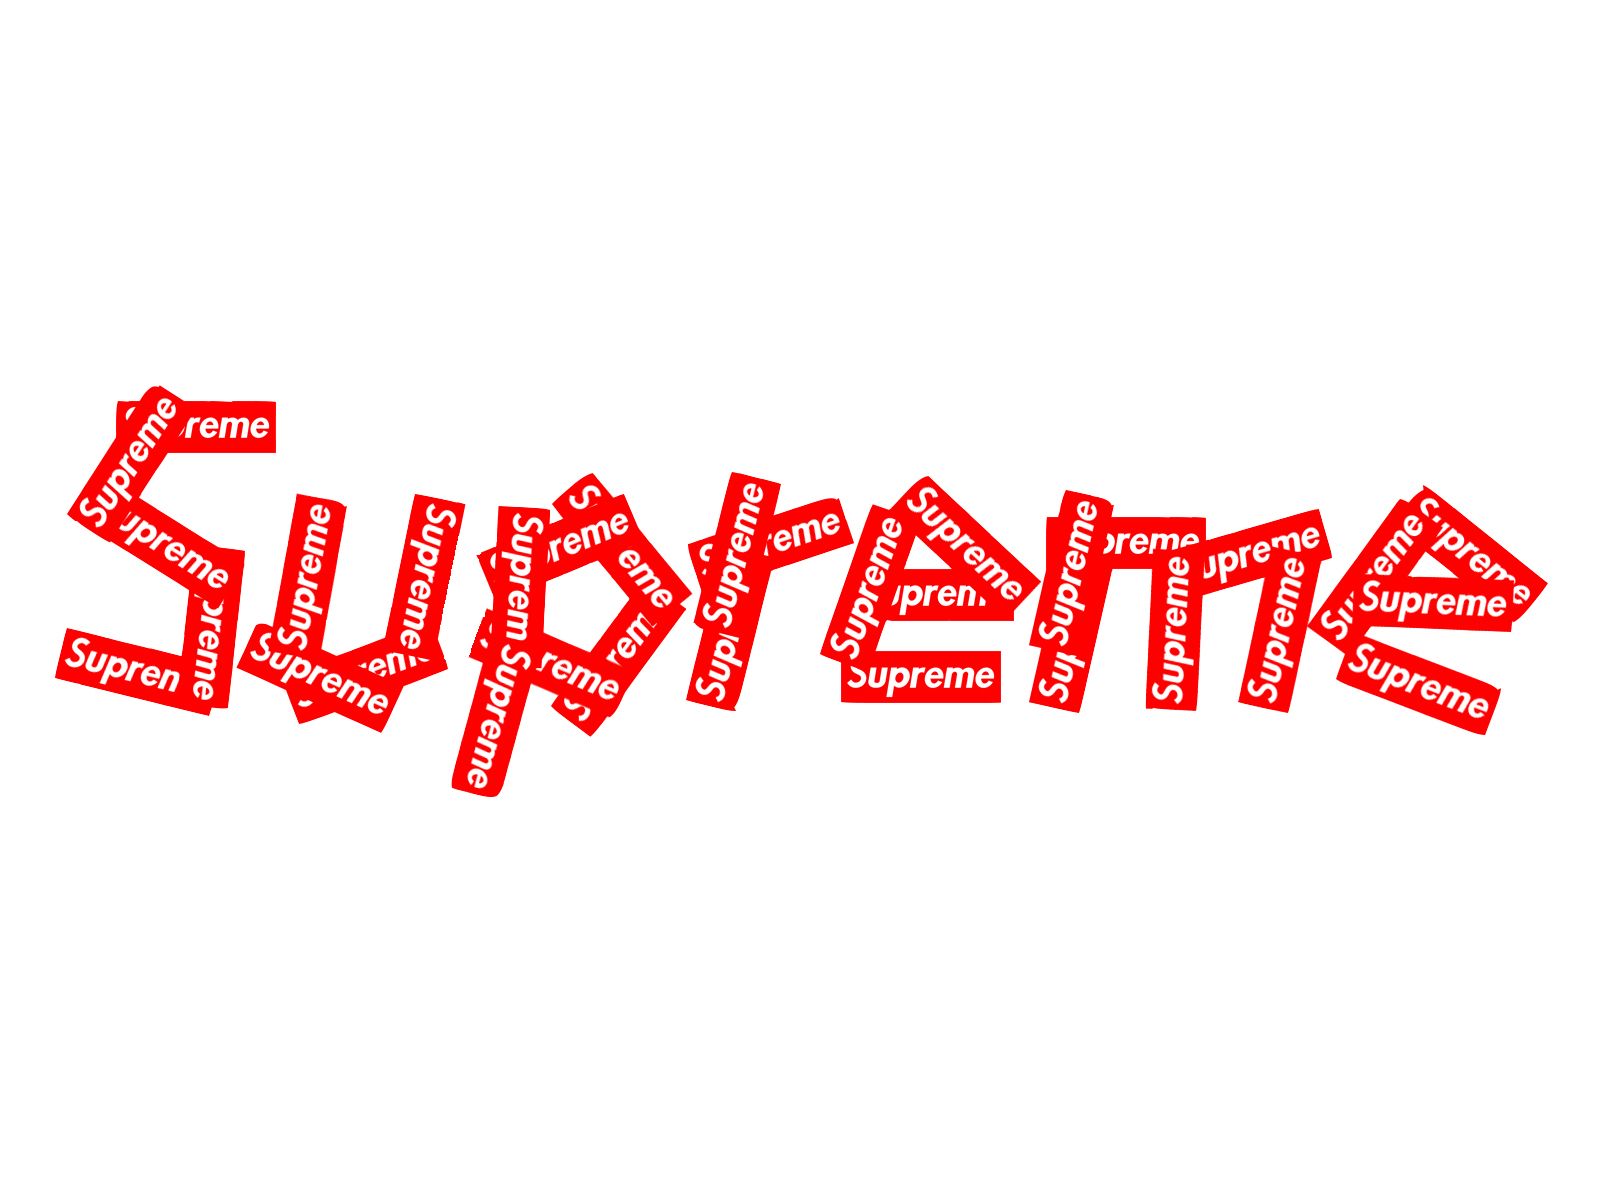 HD Supreme Wallpaper Live Hy Wp Sup In